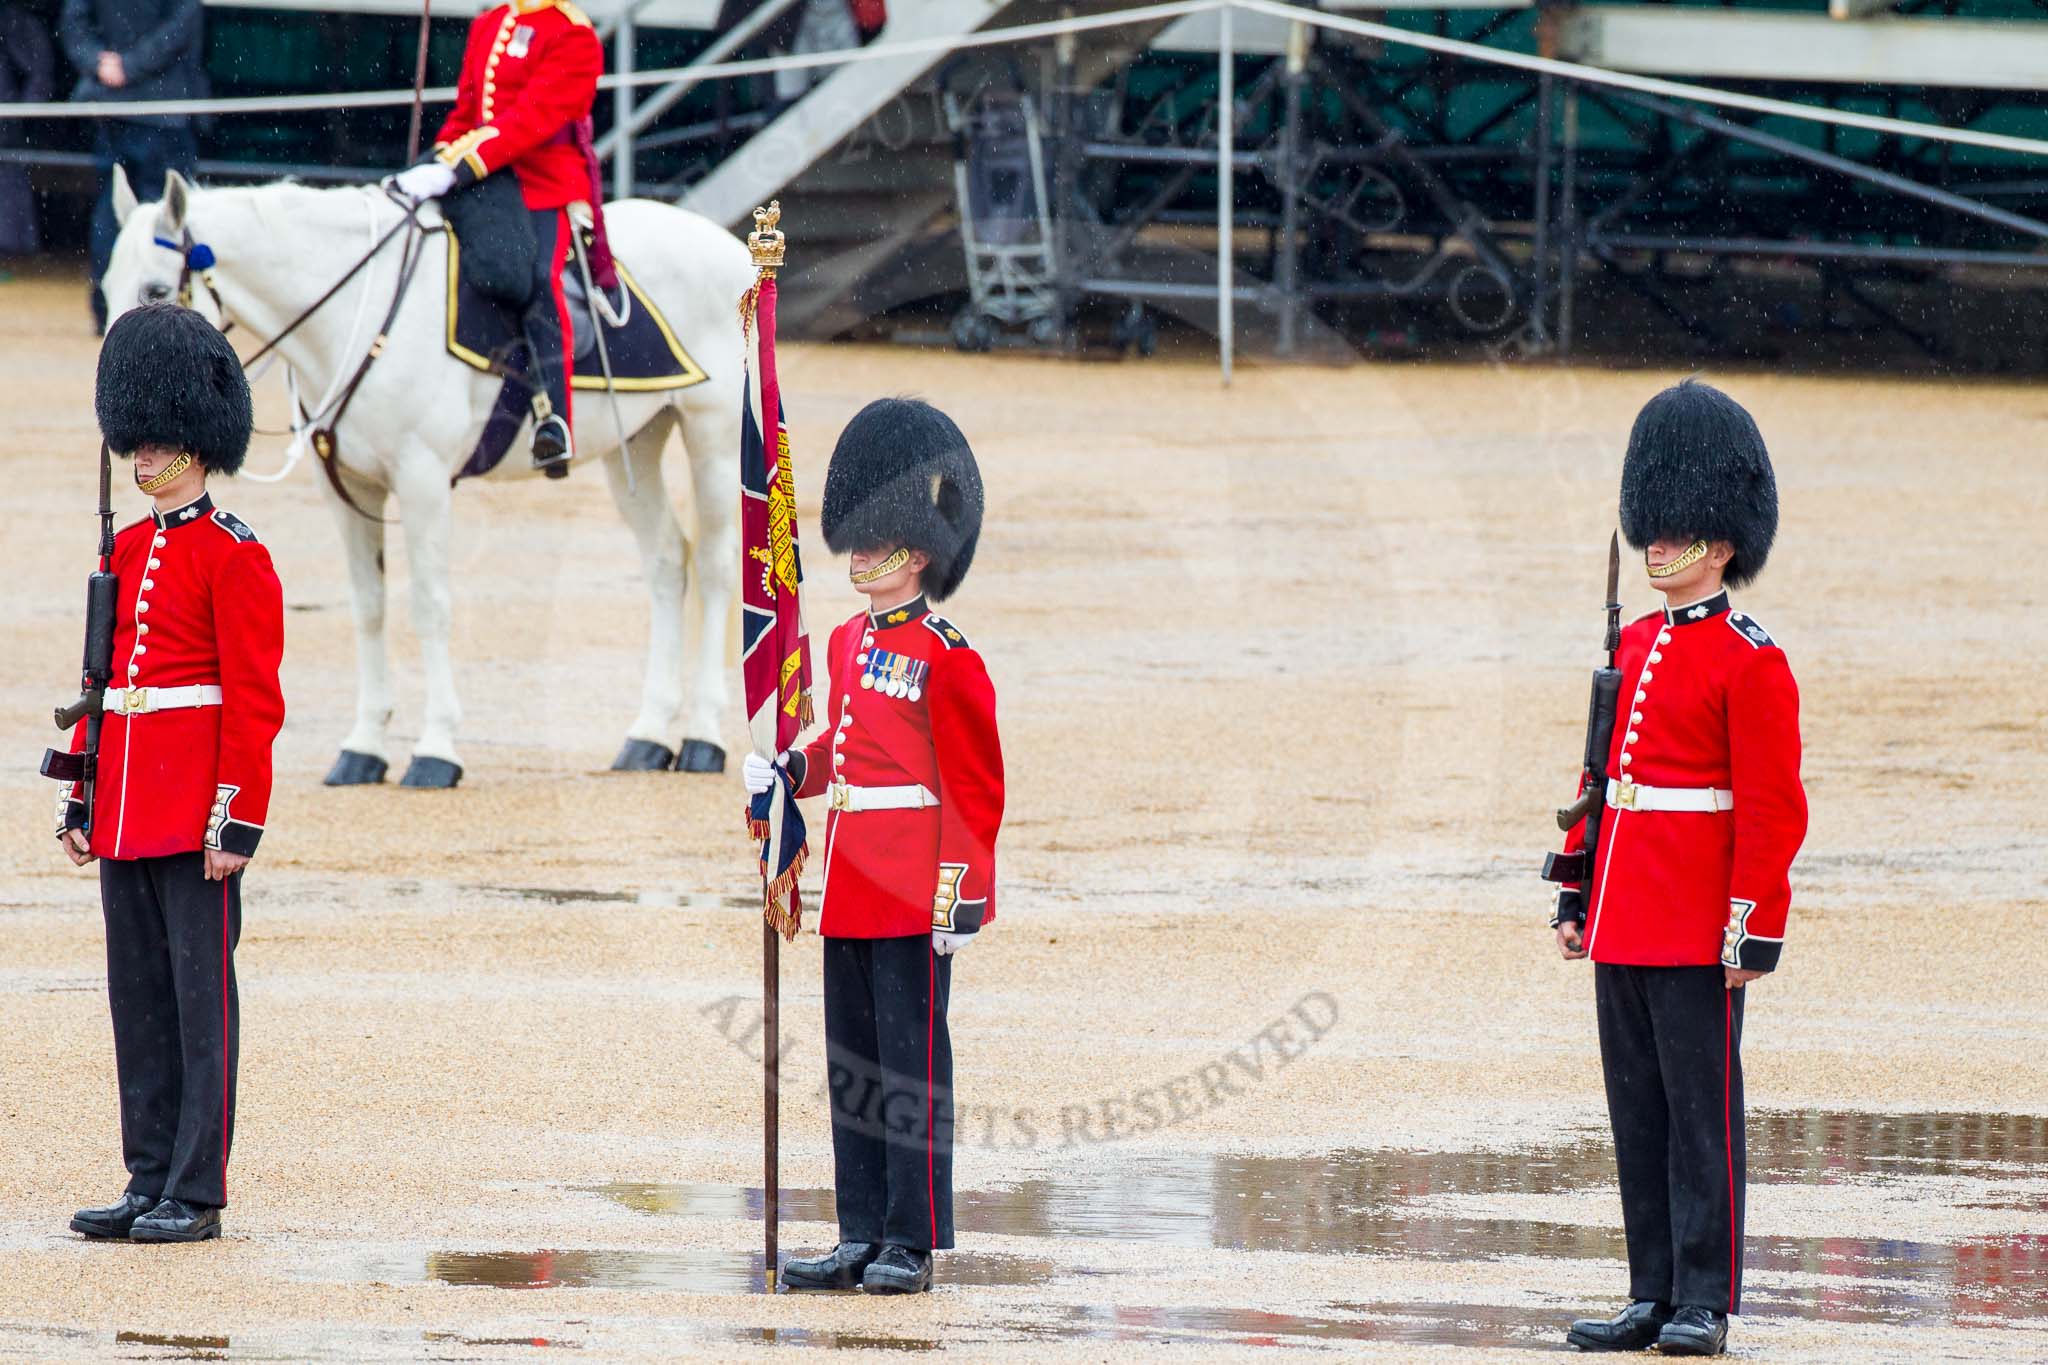 The Colonel's Review 2014.
Horse Guards Parade, Westminster,
London,

United Kingdom,
on 07 June 2014 at 11:12, image #342